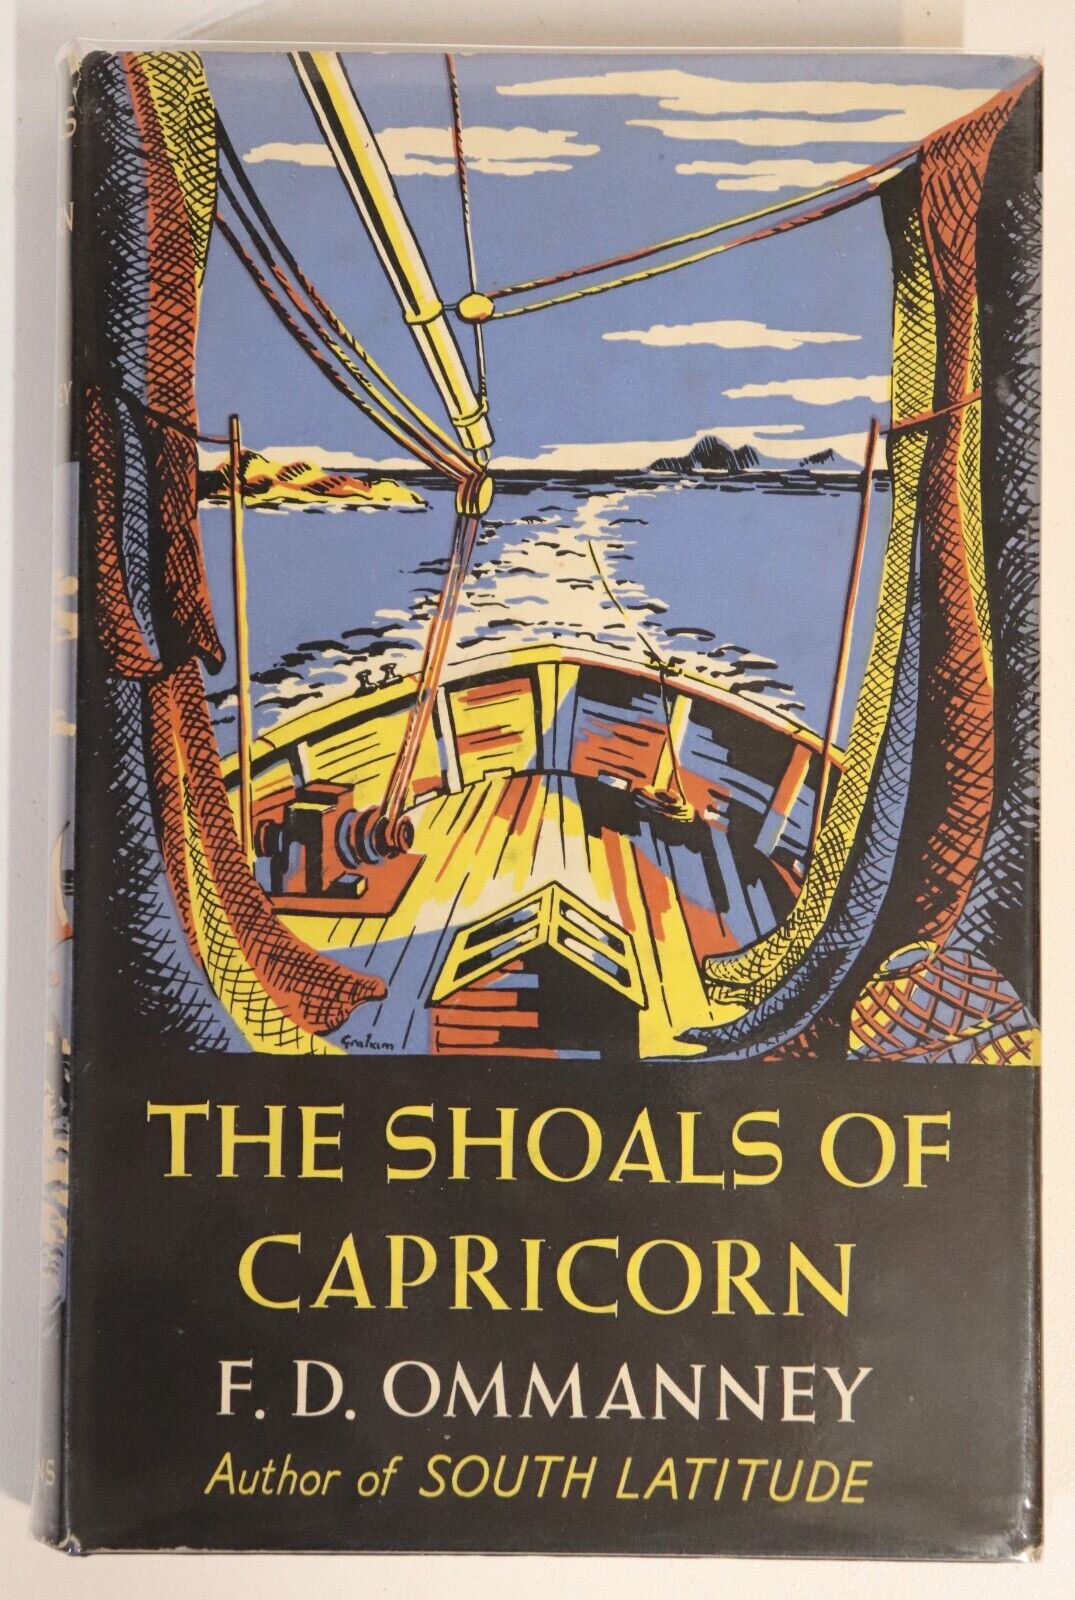 The Shoals Of Capricorn - 1952 - 1st Edition Maritime Exploration Book